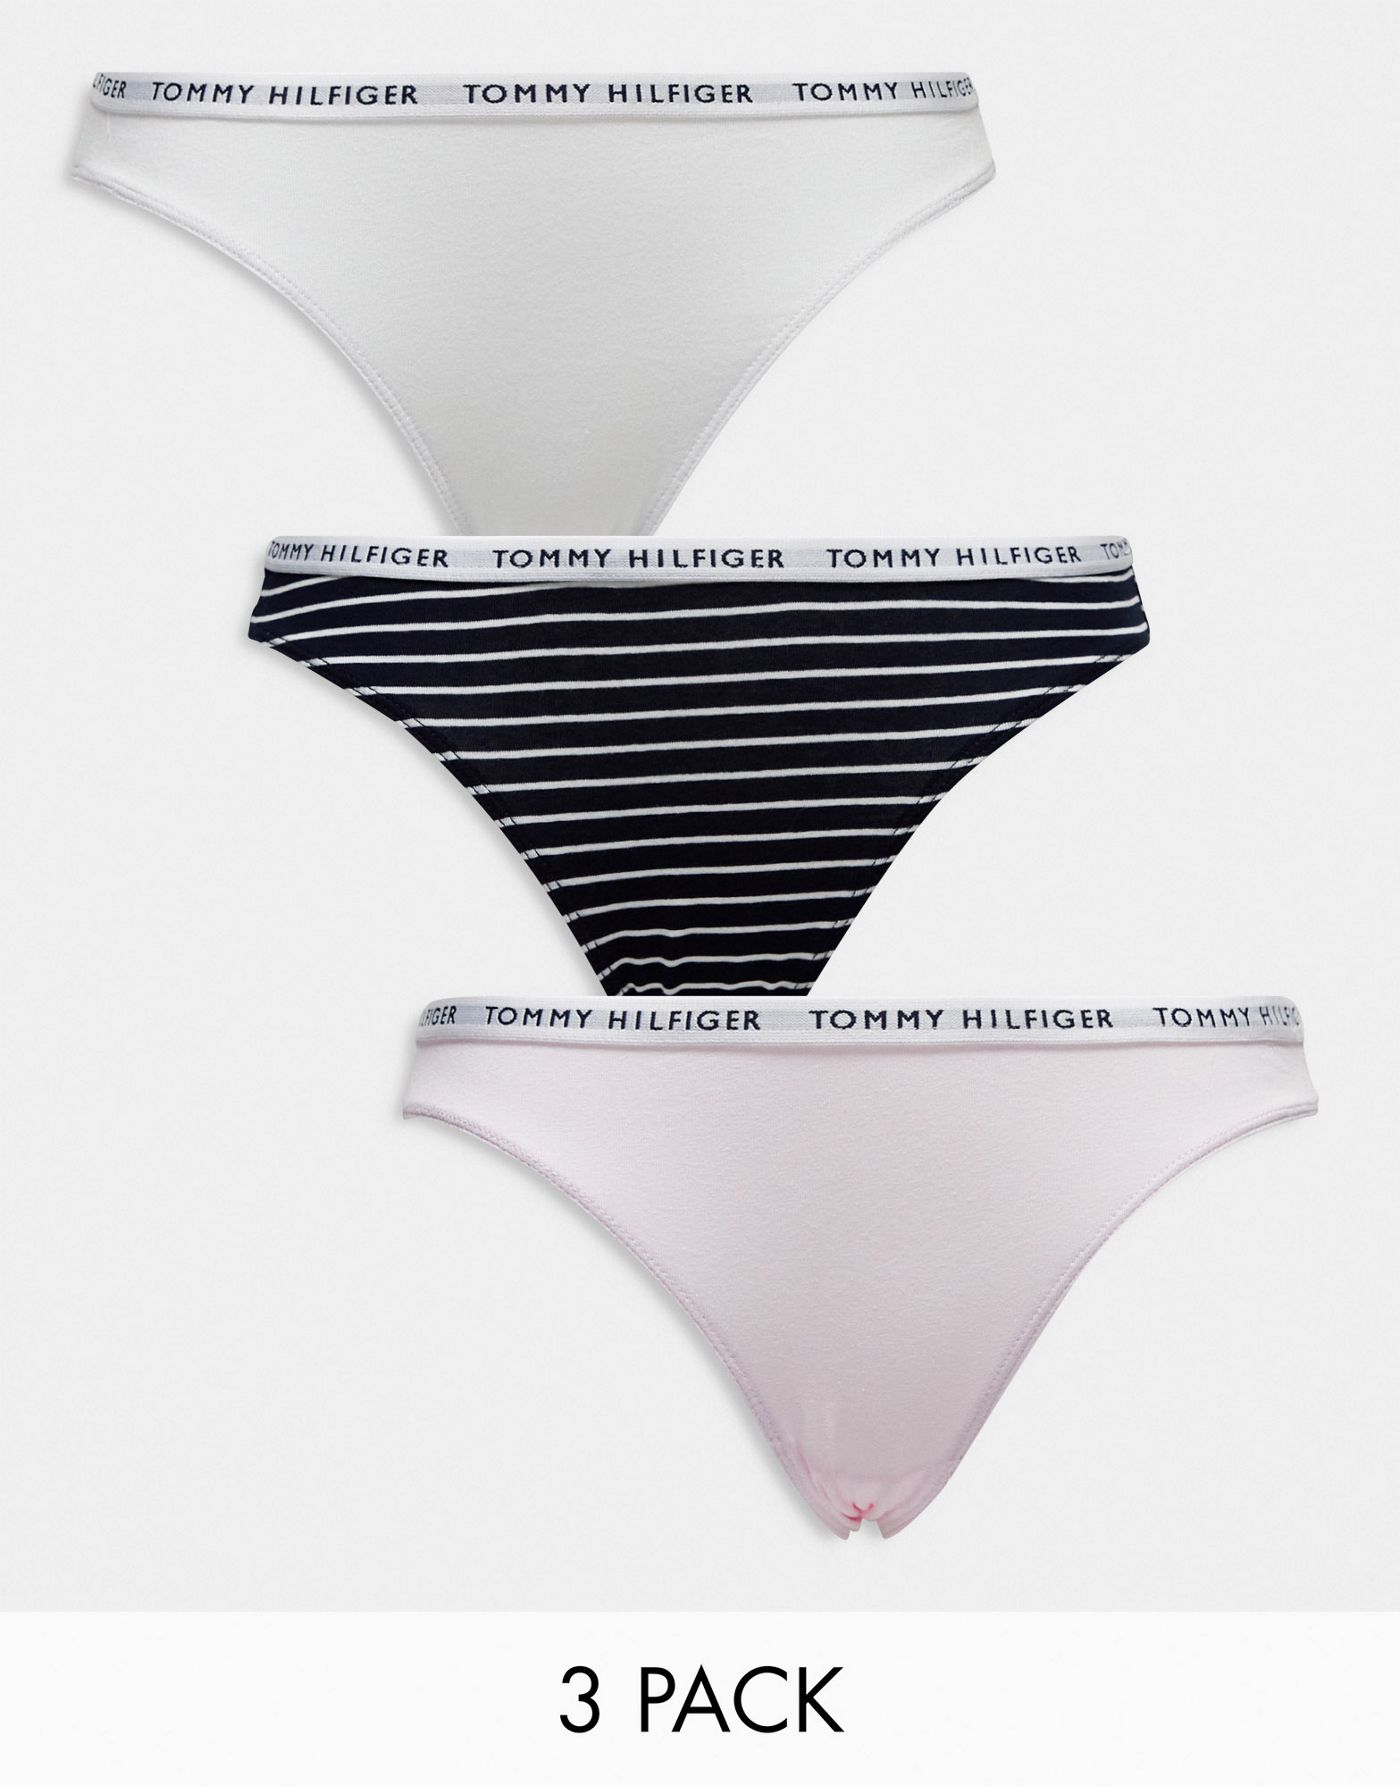 Tommy Hilfiger 3-pack bikini style brief in white, navy and pink